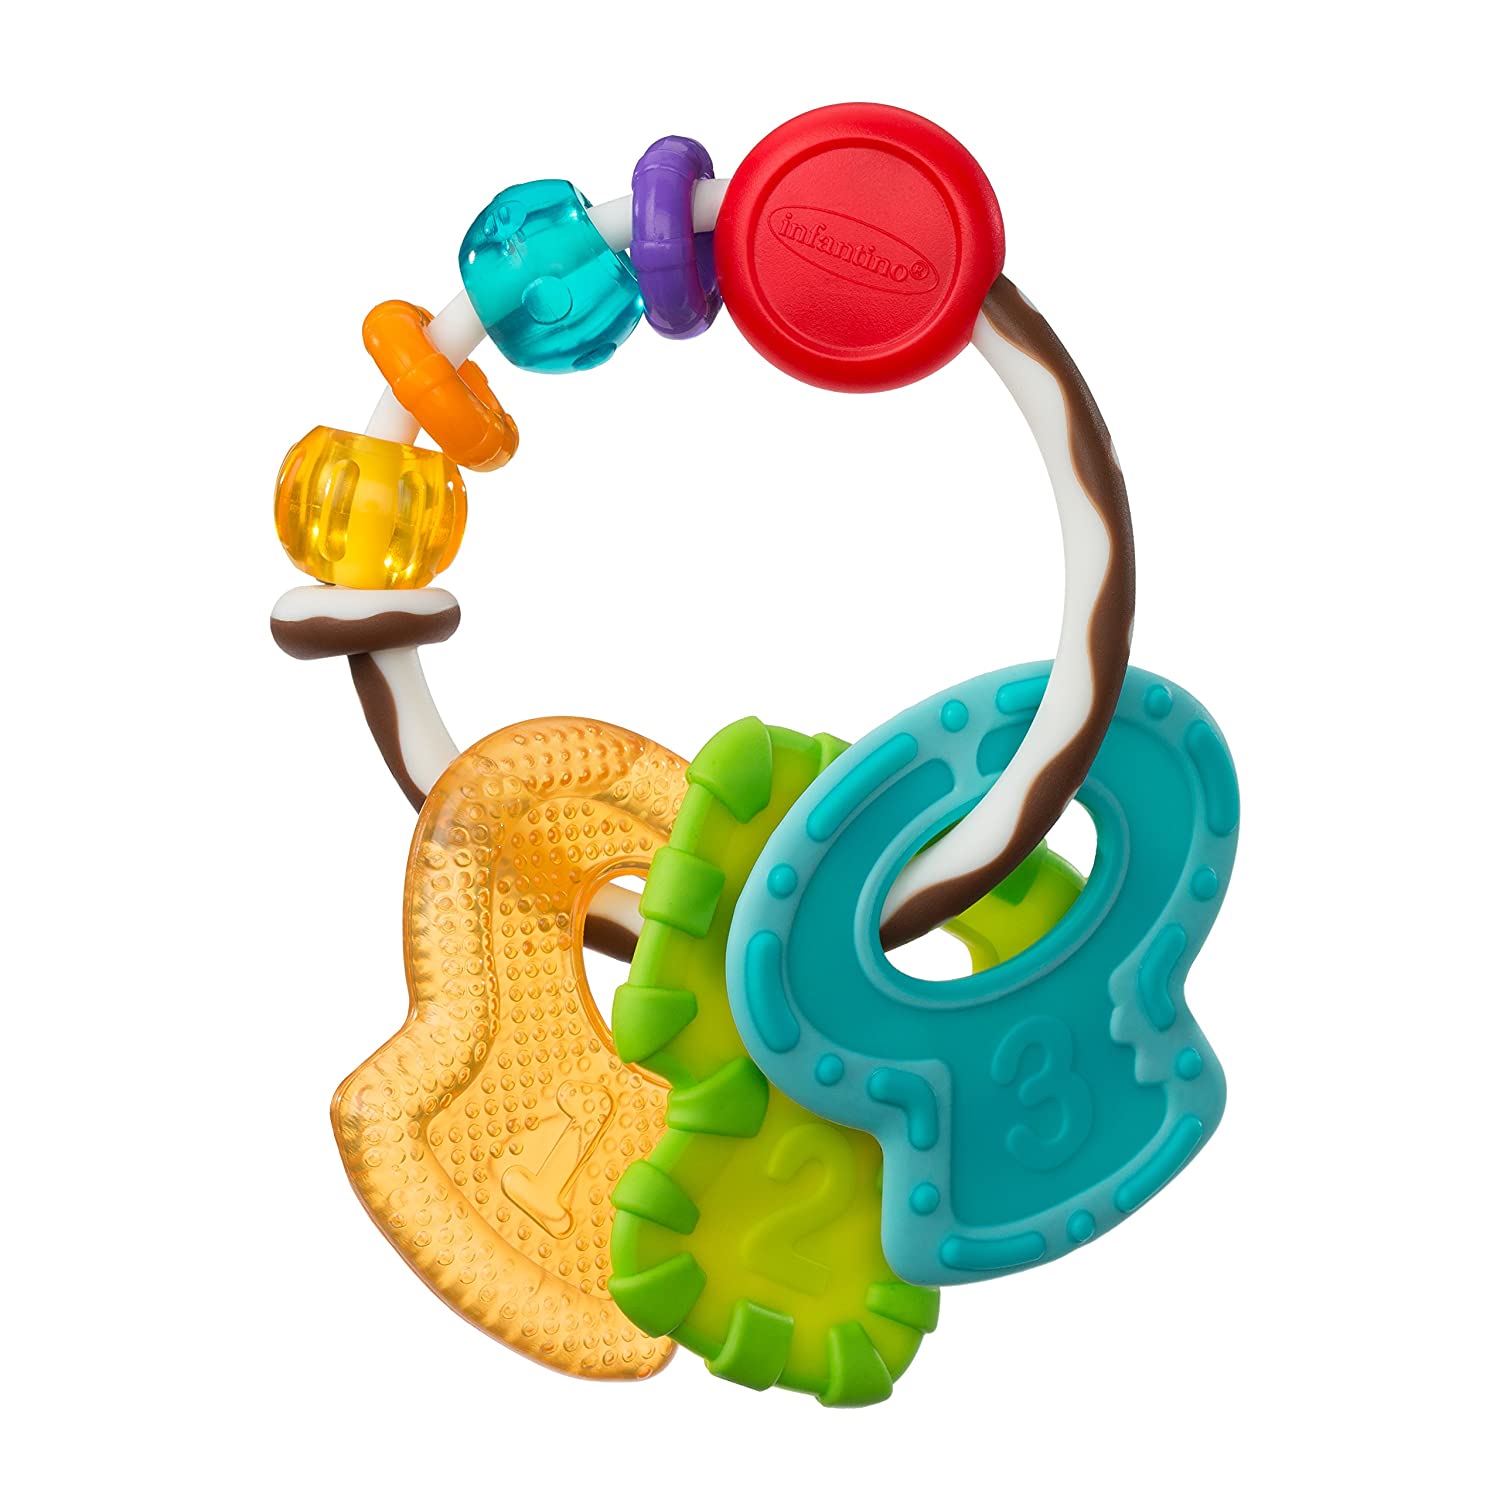 Infantino Go Gaga Slide & Chew Teether Keys Multicolor Age-6 Months & Above